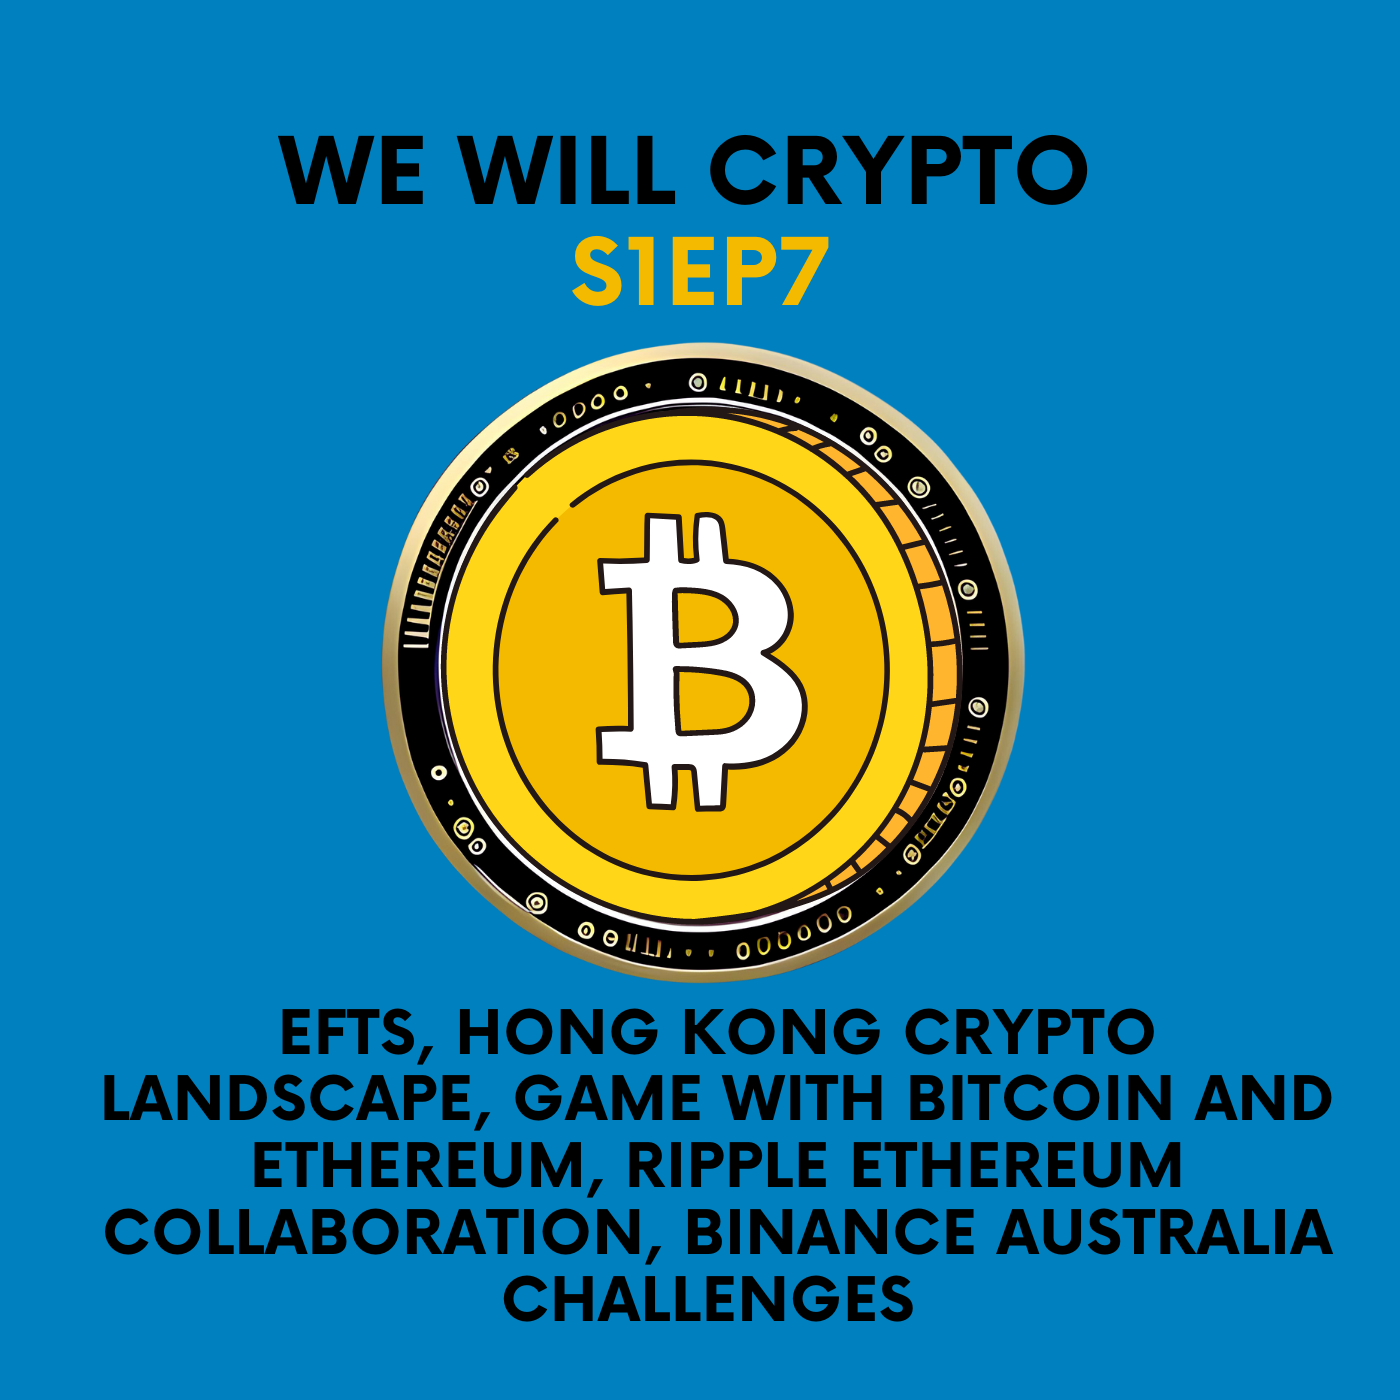 EFTs, Hong Kong Crypto Landscape, Game with Bitcoin and Ethereum, Ripple and Ethereum Collaboration, Binance Australia Challenges